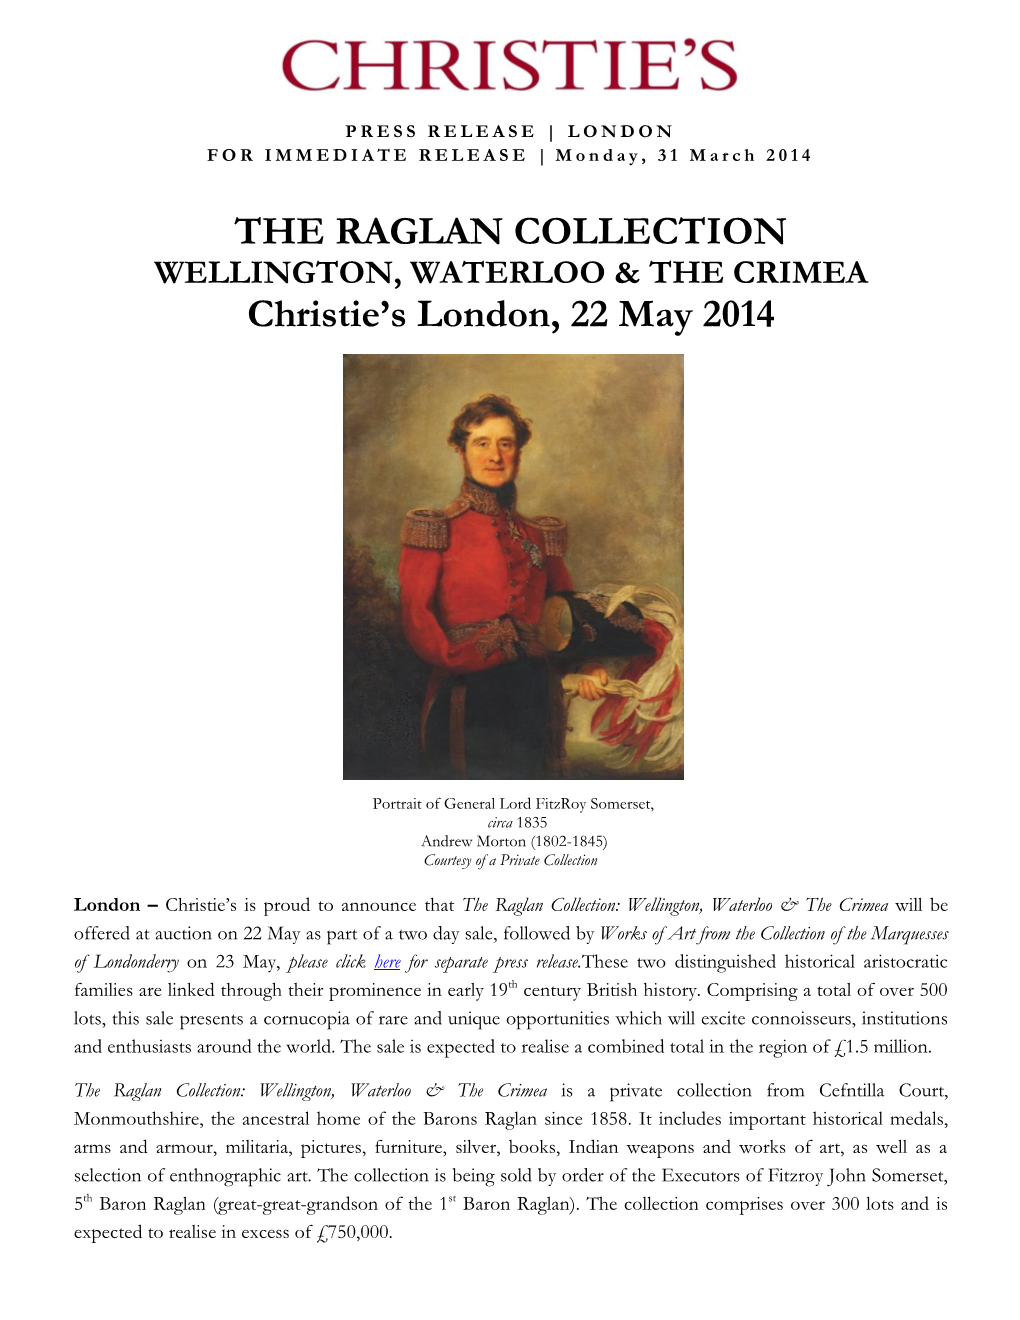 THE RAGLAN COLLECTION Christie's London, 22 May 2014